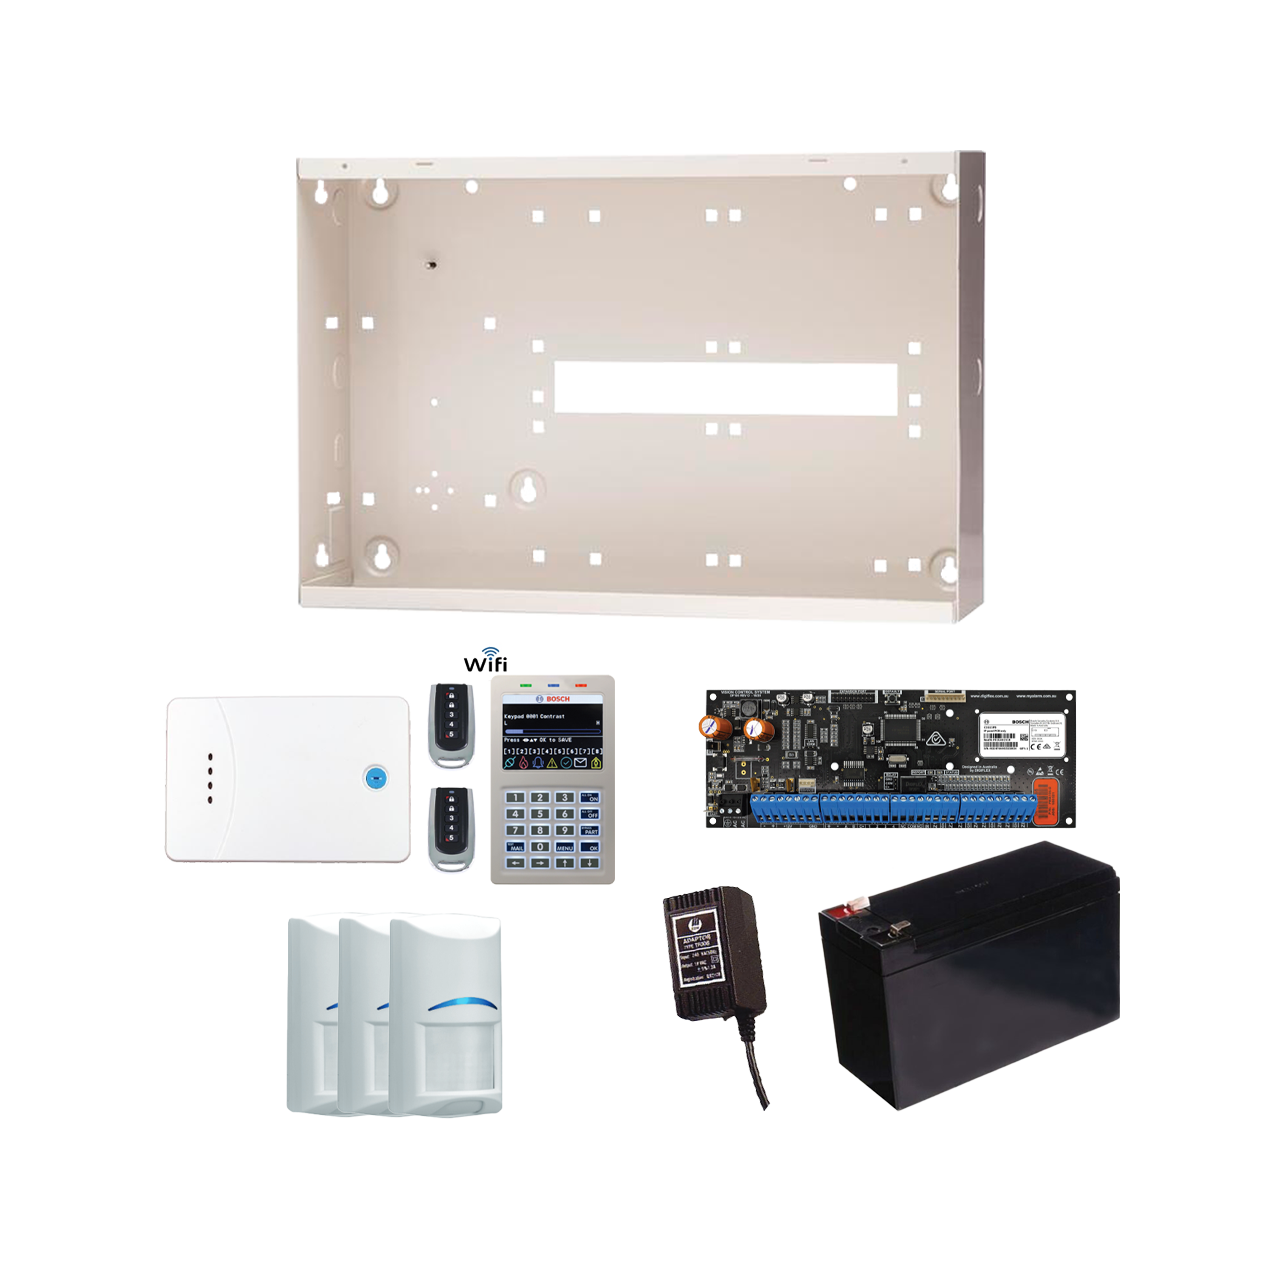 BOSCH 6000-IP WIRELESS ALM KIT INCLUDES 1x SOLUTION 6000-IP PCB WITH WIFI KEYPAD 3x WIRELESS PET PIRs 1x MW250 METAL ENCLOSURE 1x 12V7Ah BATTERY 1x 18VAC POWER SUPPLY 2x 5 BUTTON REMOTES 1x SOLUTION 6000 RECEIVER